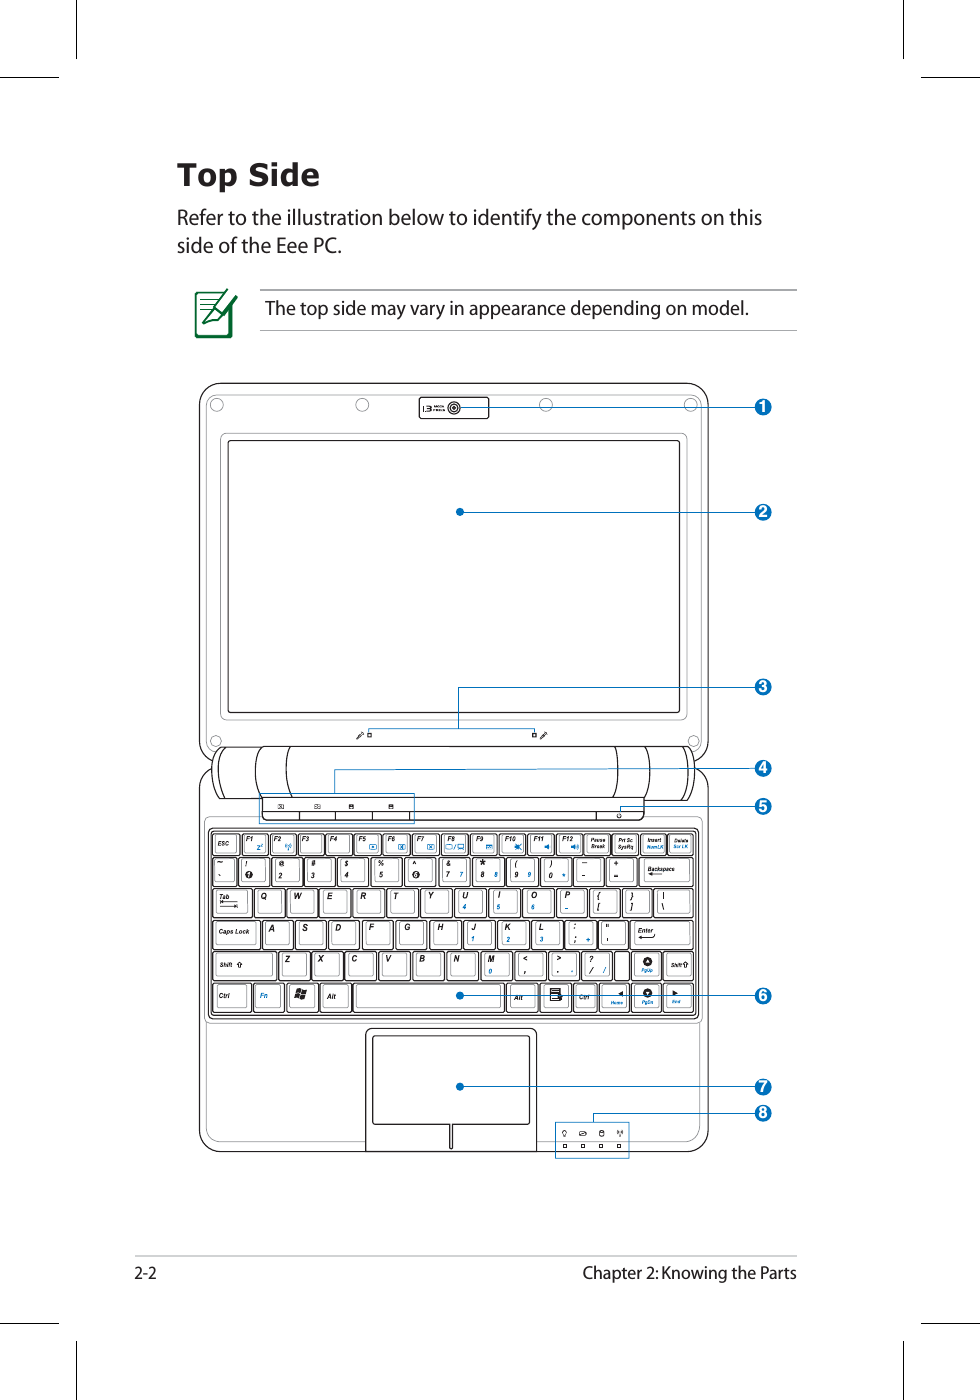 2-2Chapter 2: Knowing the PartsTop SideRefer to the illustration below to identify the components on this side of the Eee PC.23167584The top side may vary in appearance depending on model.